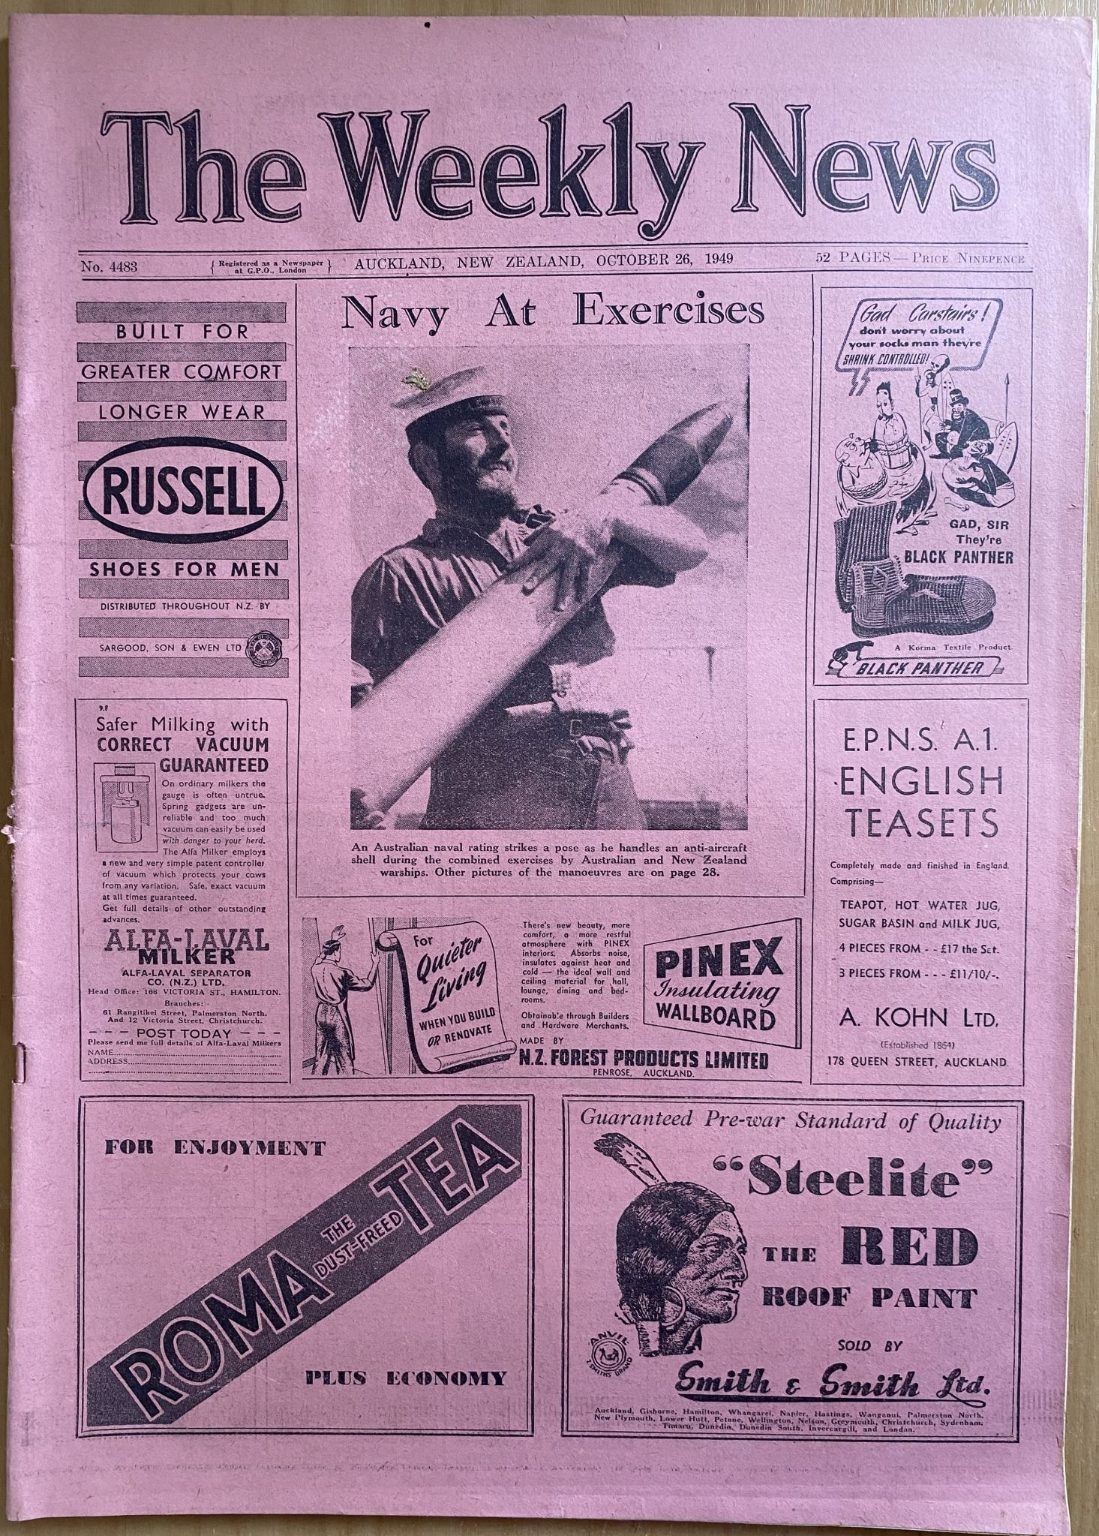 OLD NEWSPAPER: The Weekly News, No. 4483, 26 October 1949